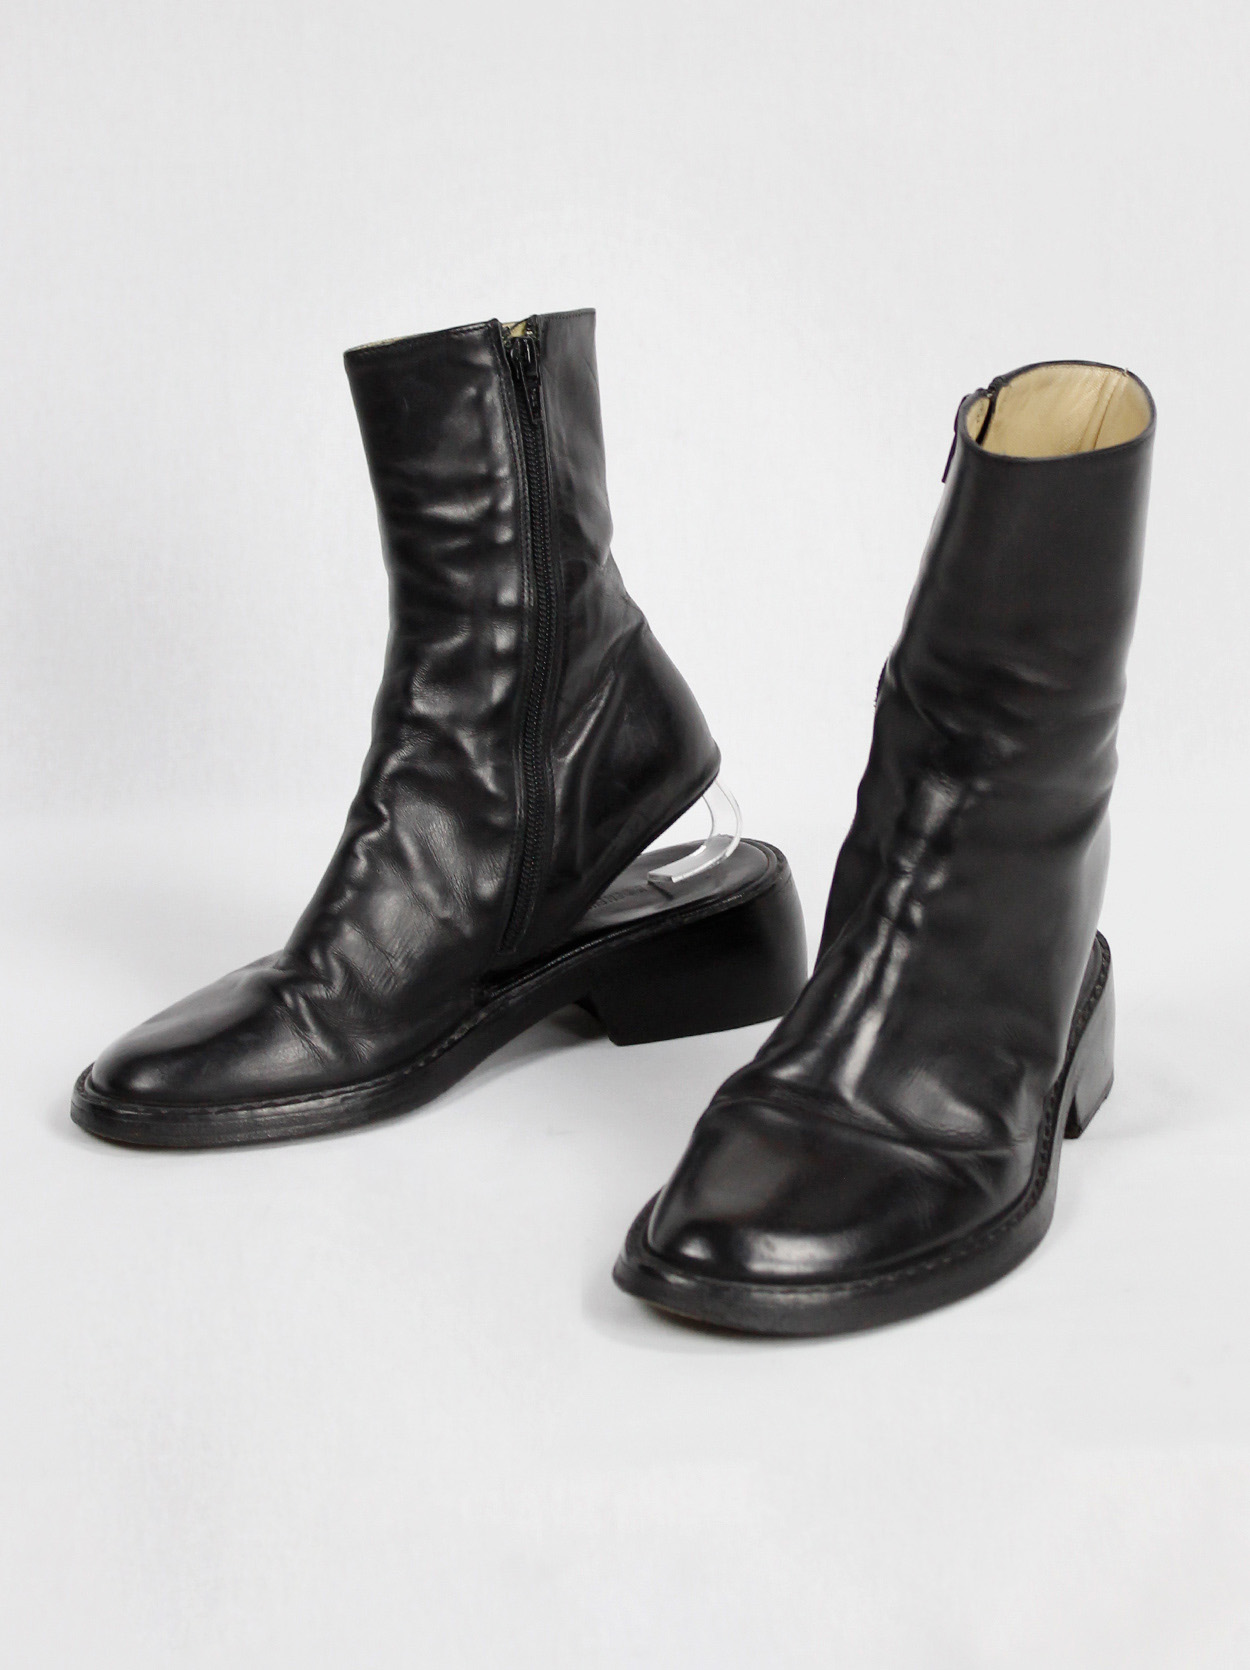 appel Dat Fjord Ann Demeulemeester black ankle boots with cut out heel (36) — spring 1994 -  V A N II T A S